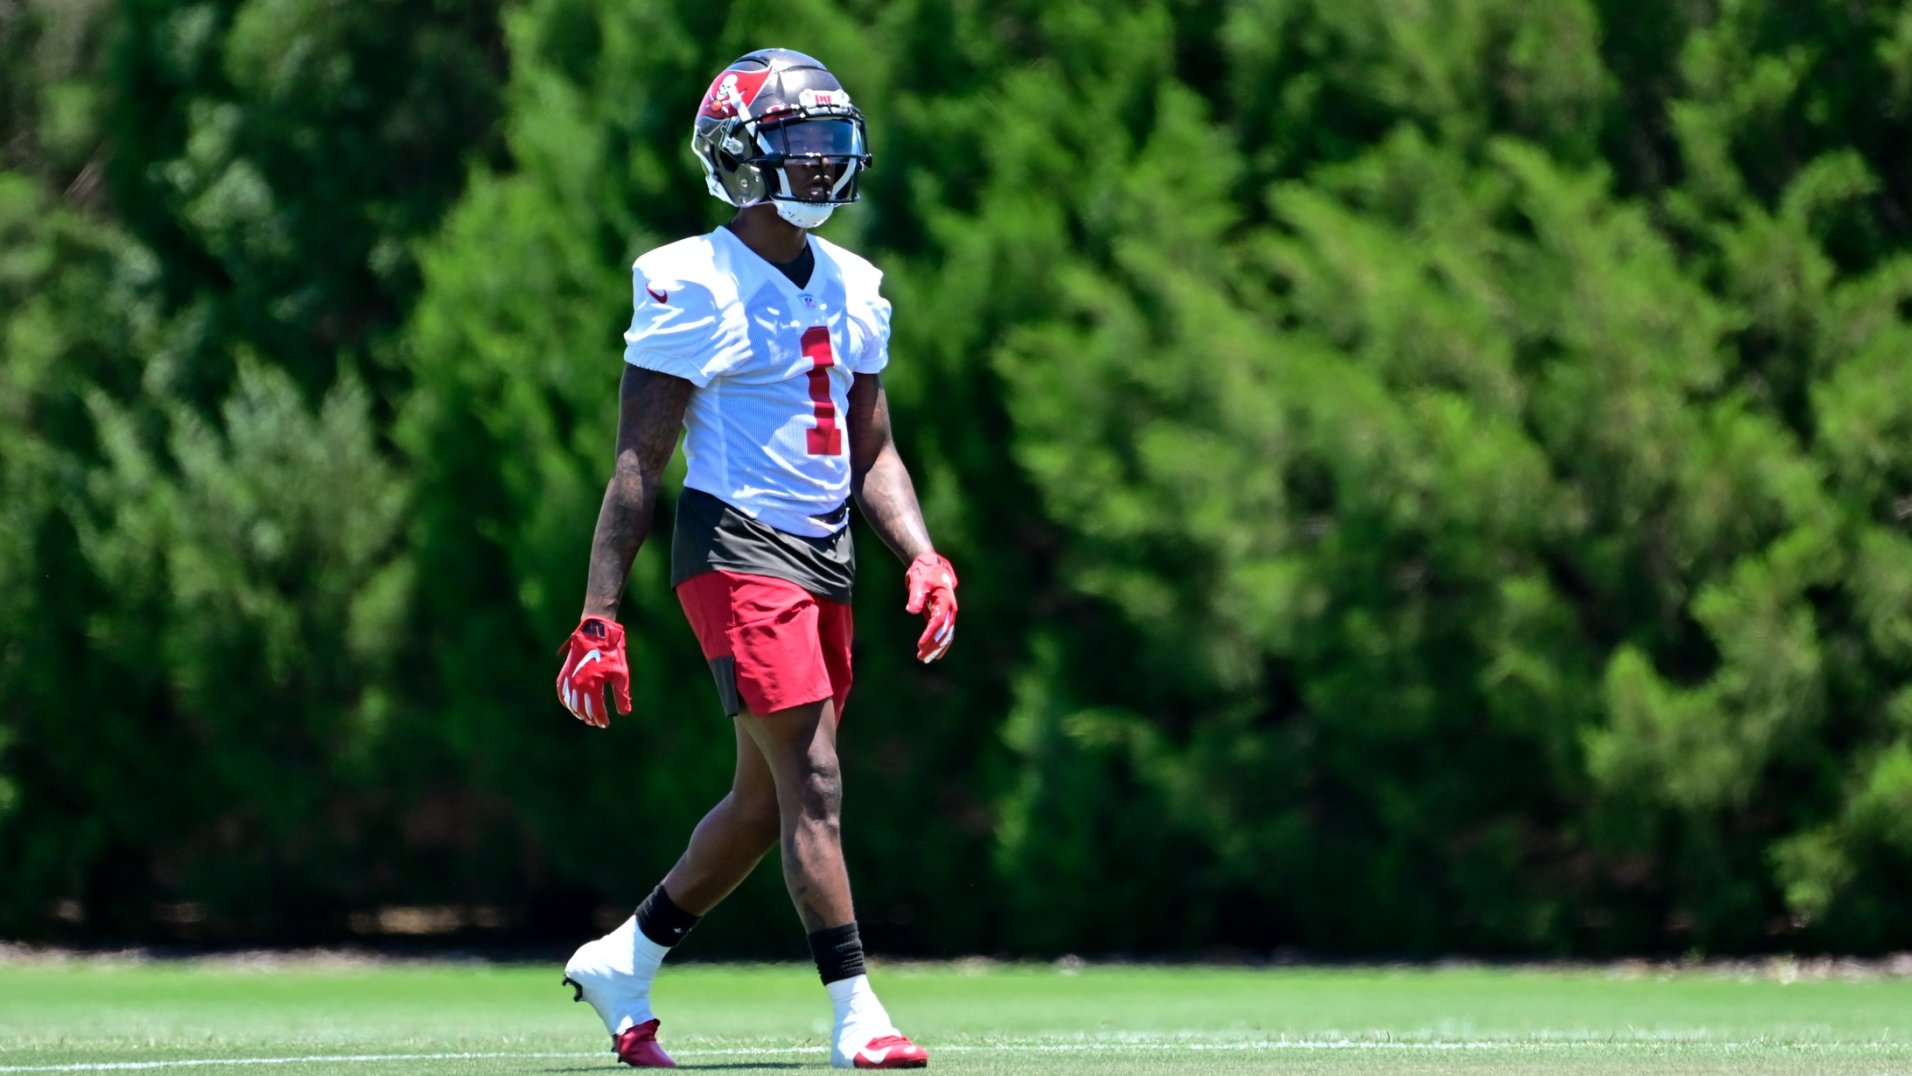 2021 NFL Training Camp Lateround rookie risers NFL News, Rankings